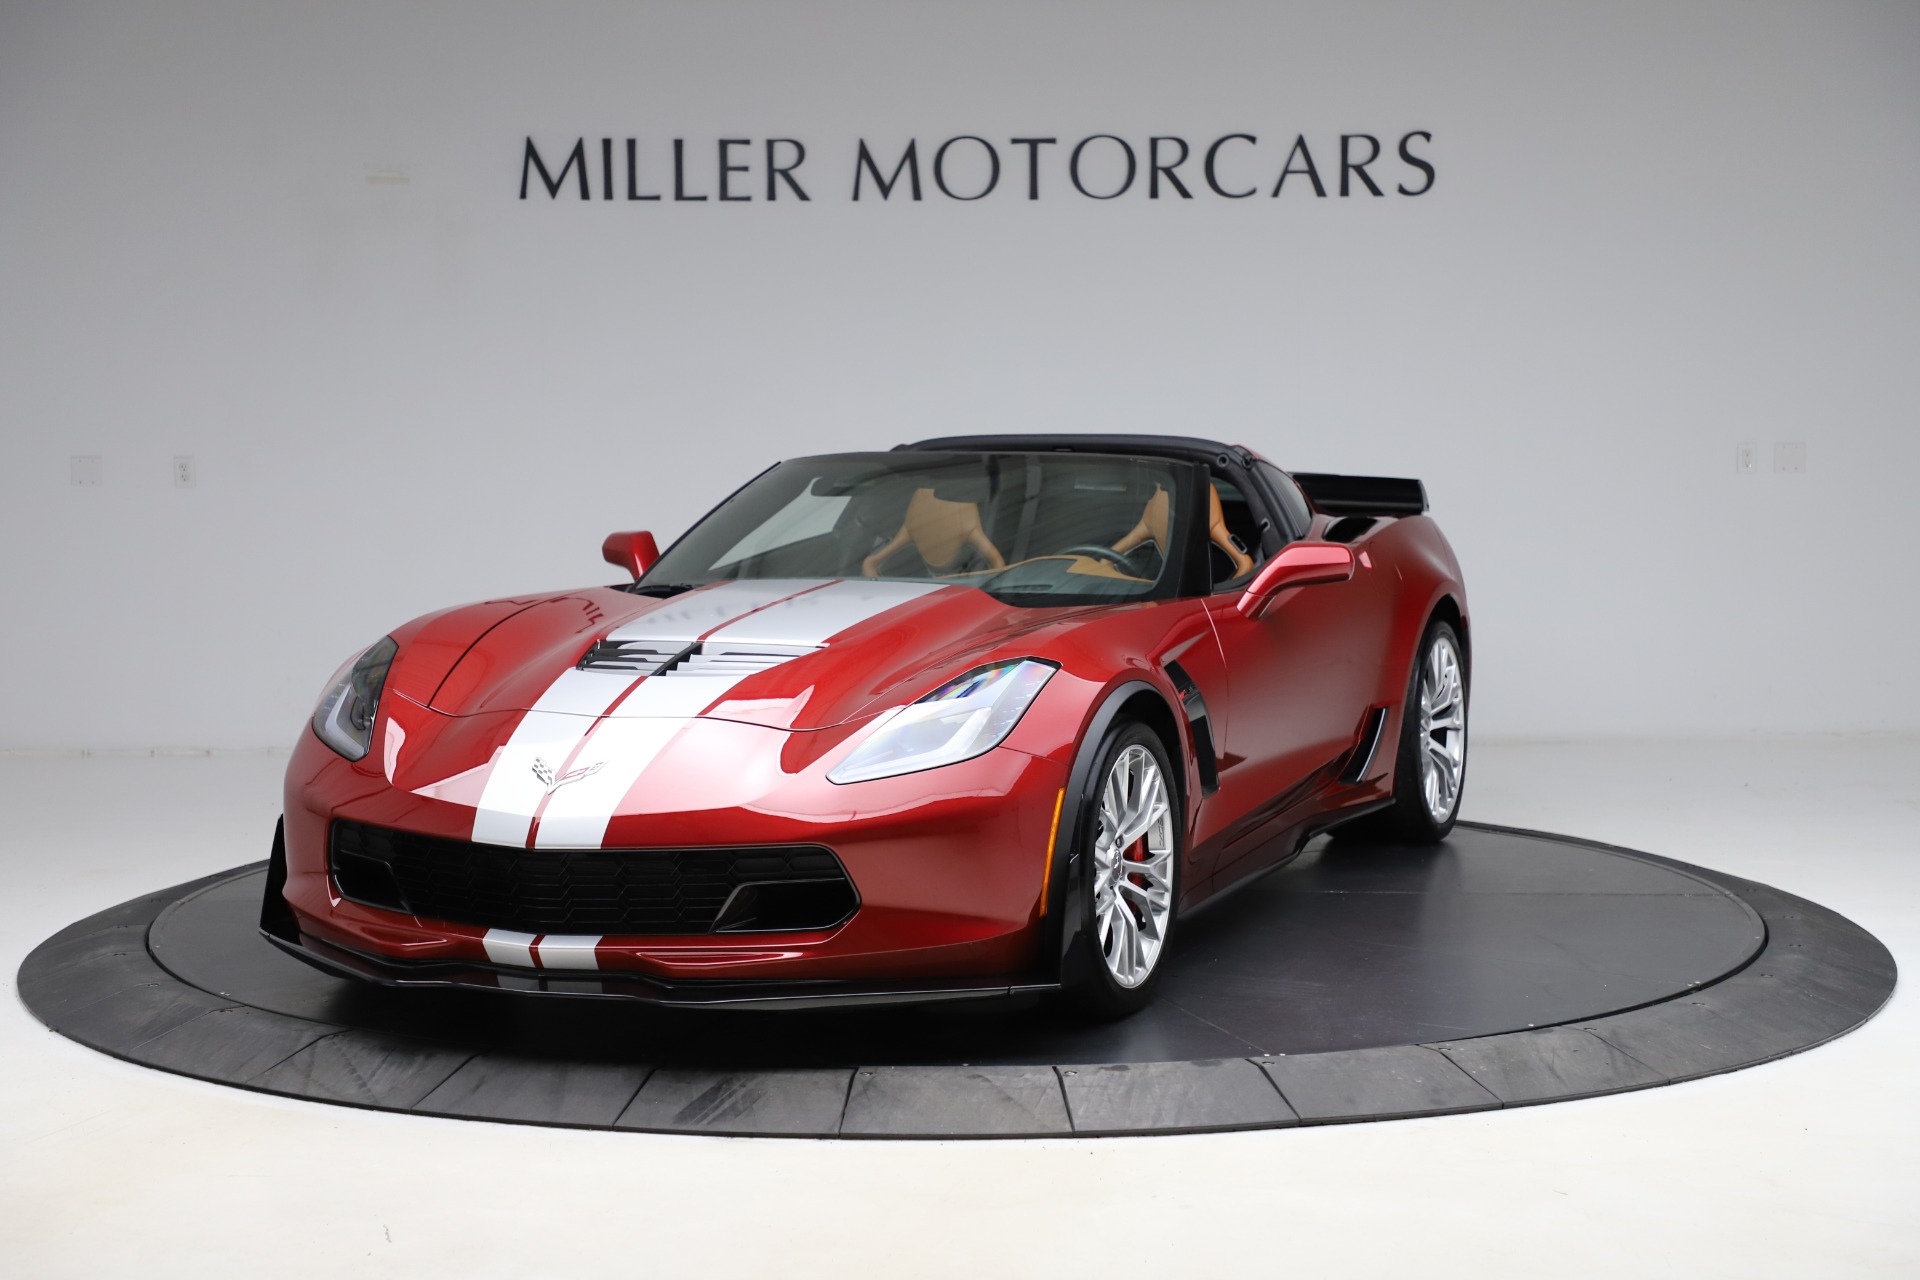 Used 2015 Chevrolet Corvette Z06 for sale Sold at McLaren Greenwich in Greenwich CT 06830 1